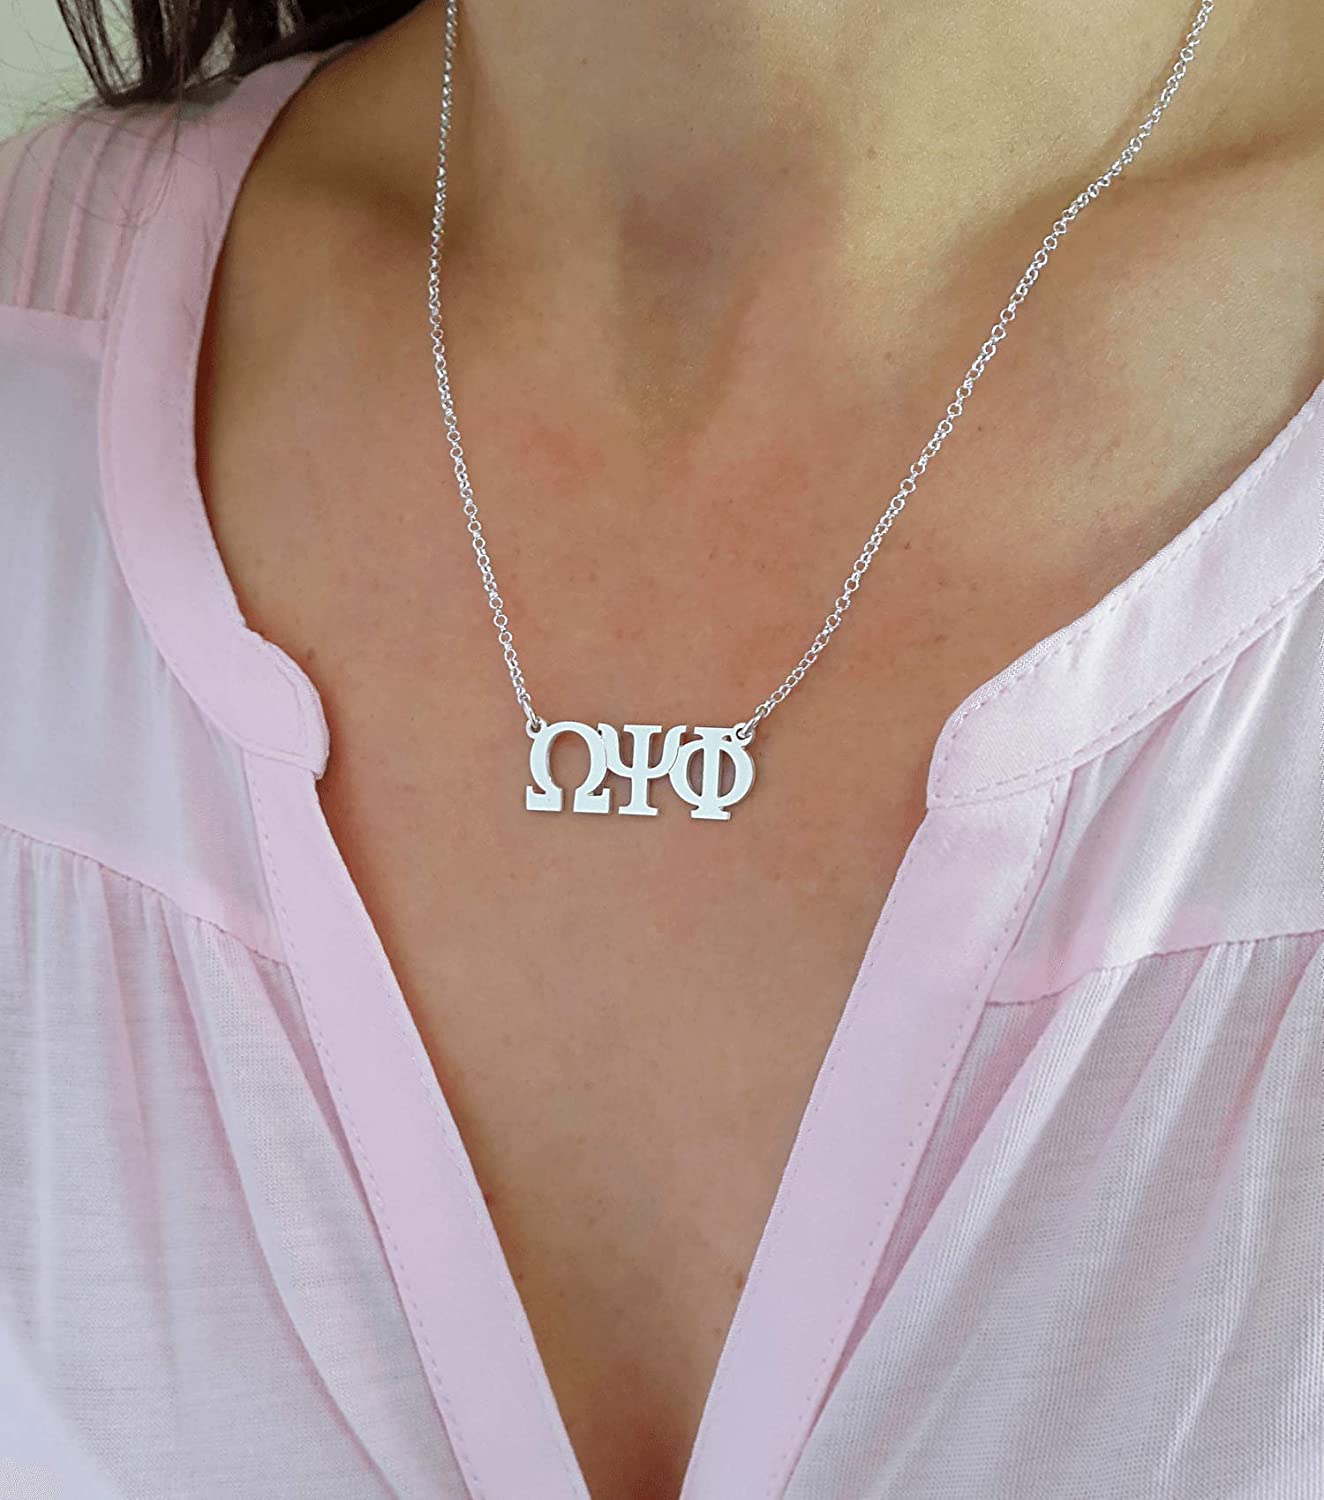 Delta Gamma Gifts Necklace 925 Sterling Silver, Personalized Sorority Jewelry